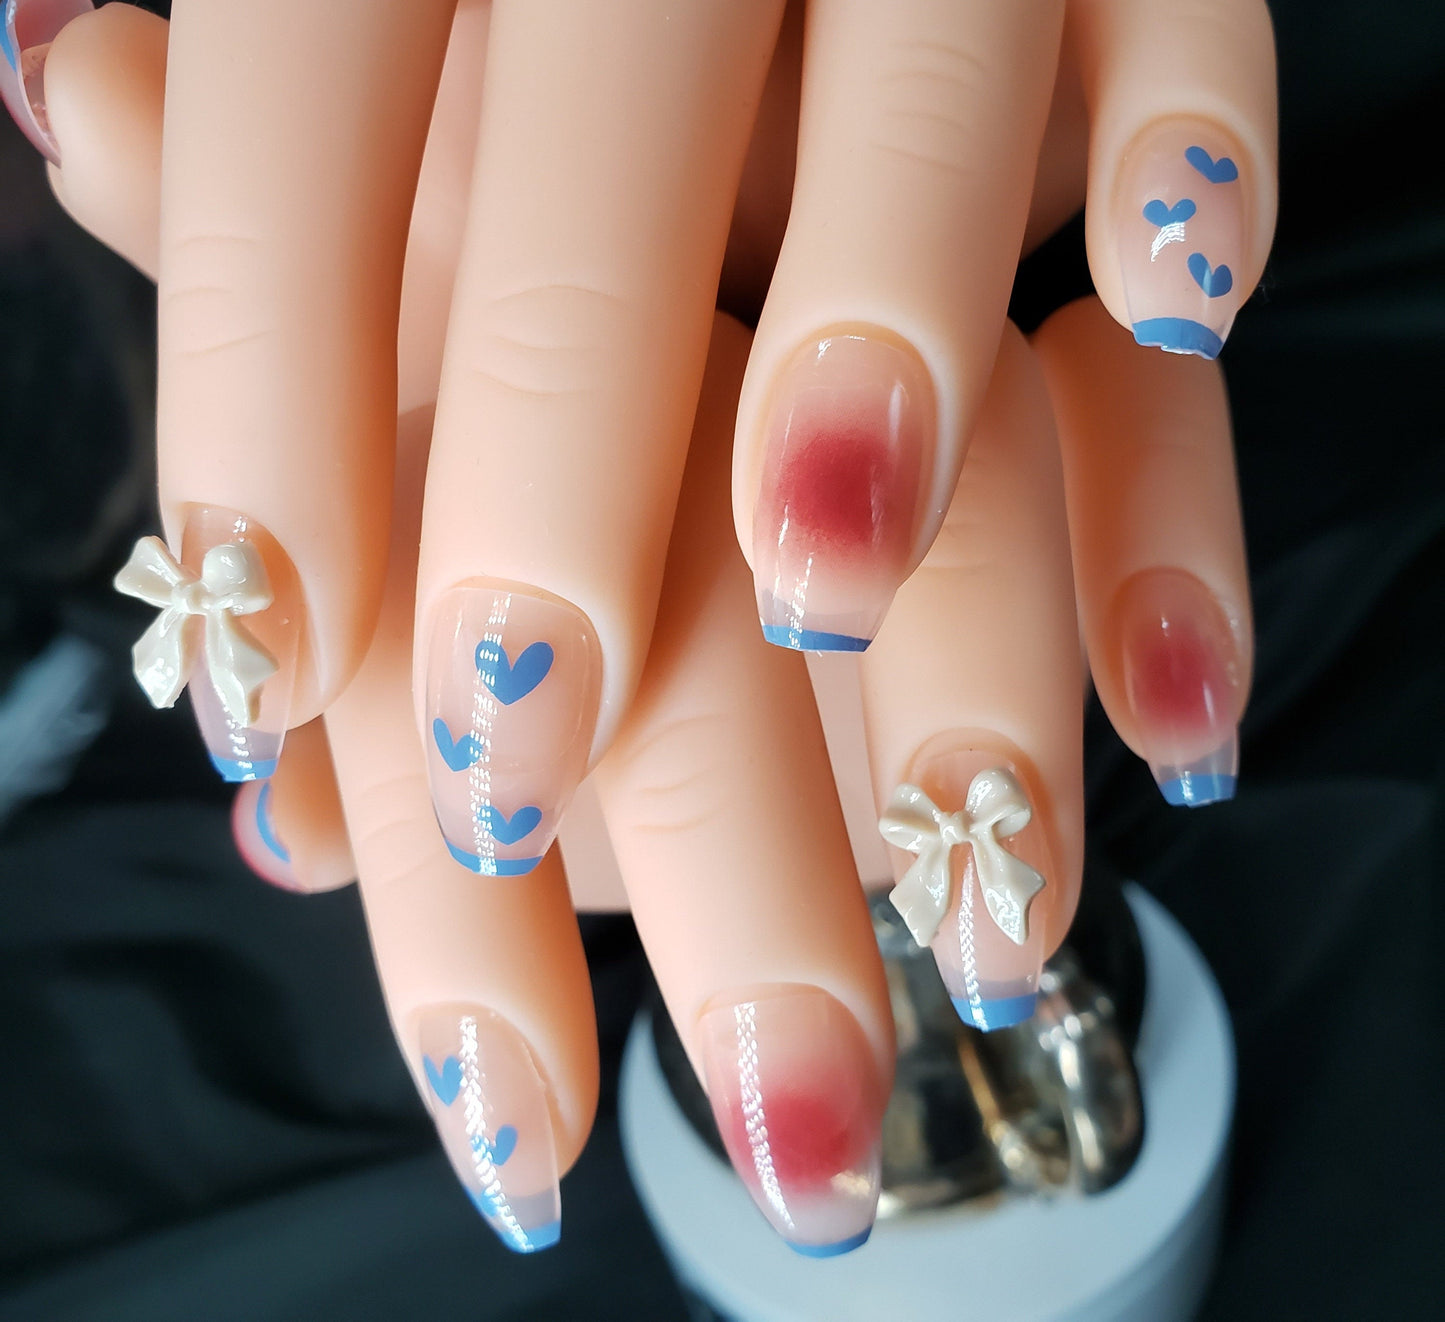 24 Press On Nails Hearts Bows medium Coffin glue on blue tip cute kawaii rosy clear jelly